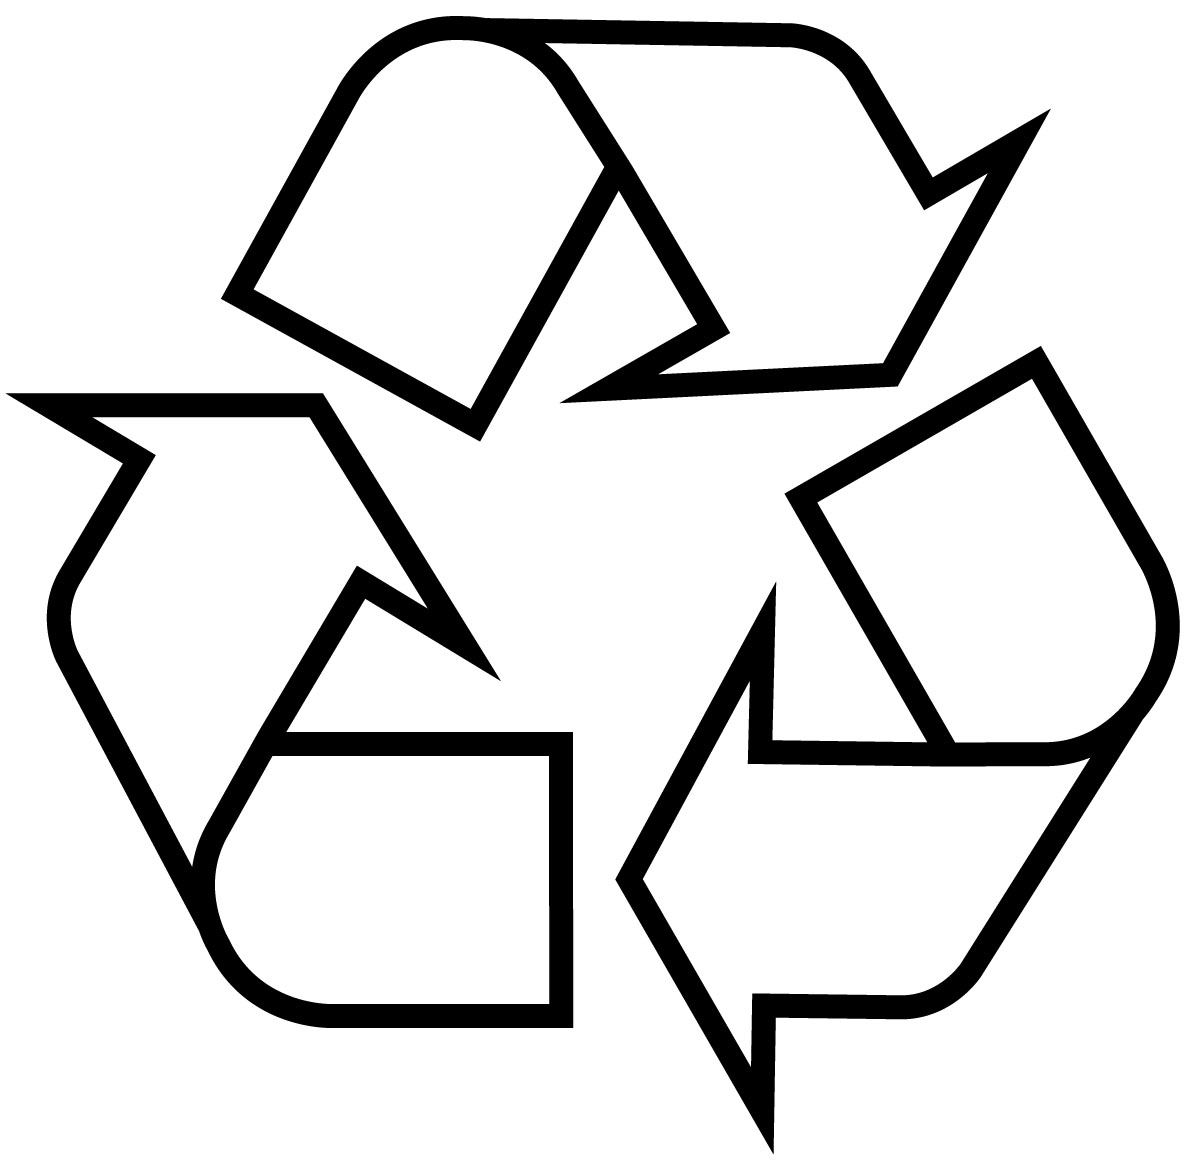 Picture Of Recycling Symbol - Clipart library